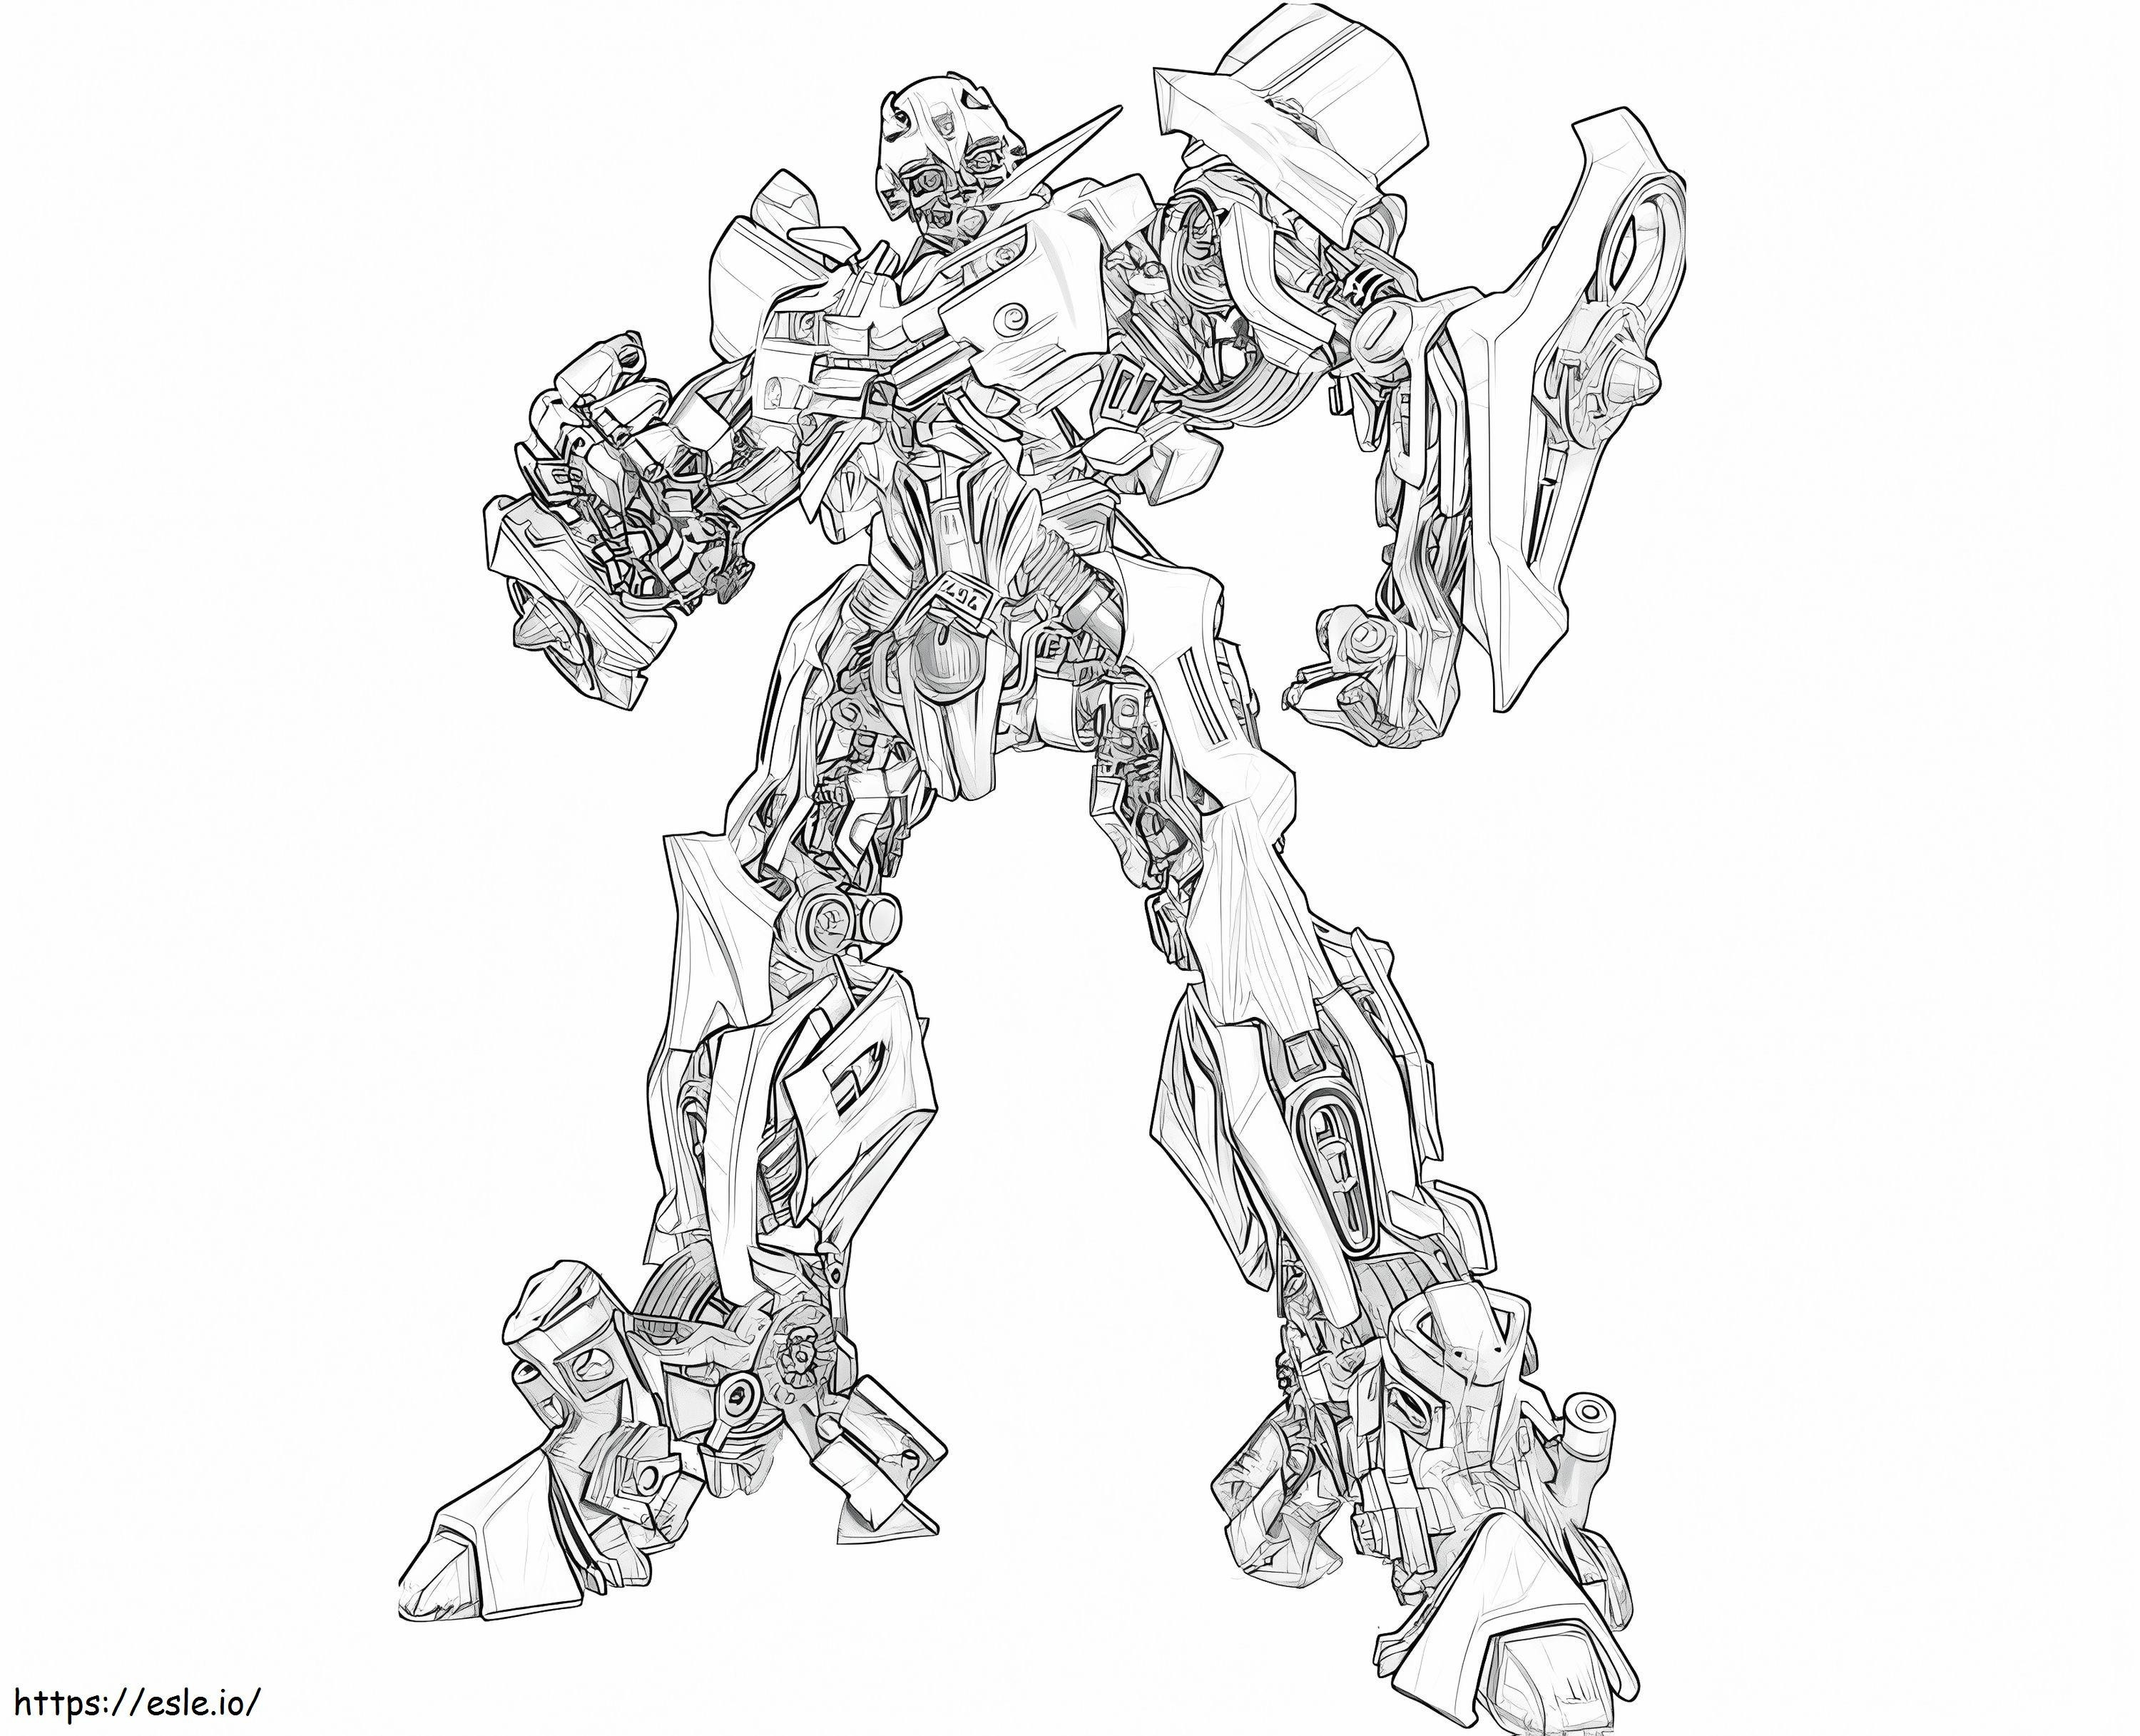 Cool Bumblebee coloring page